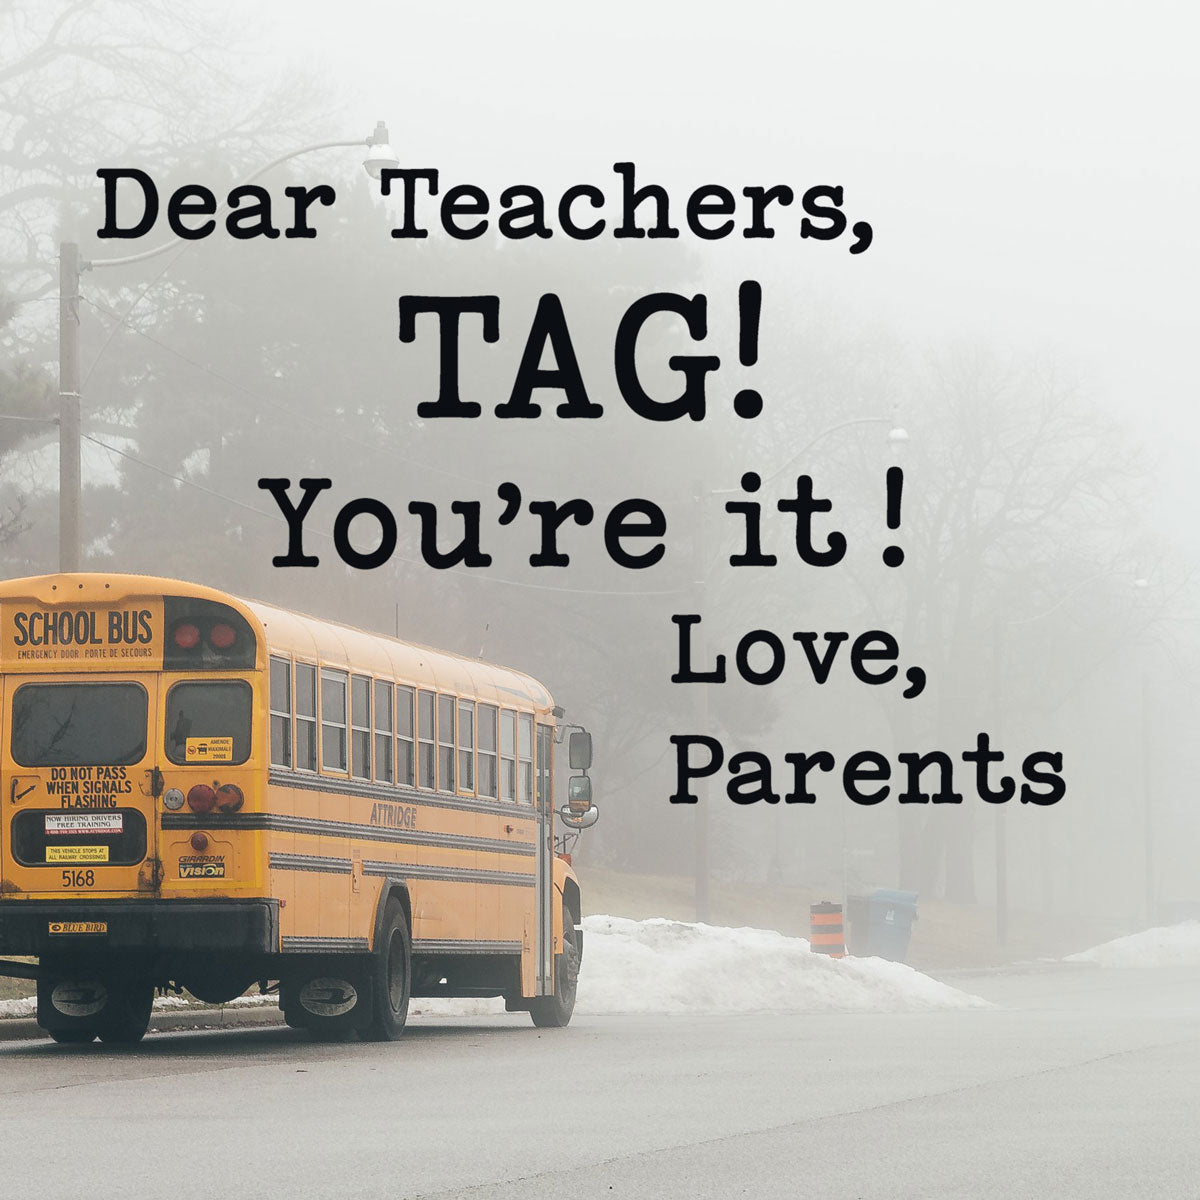 Dear Teachers, Tag! You're it! Love, Parents svg cut file | Free for Personal Use